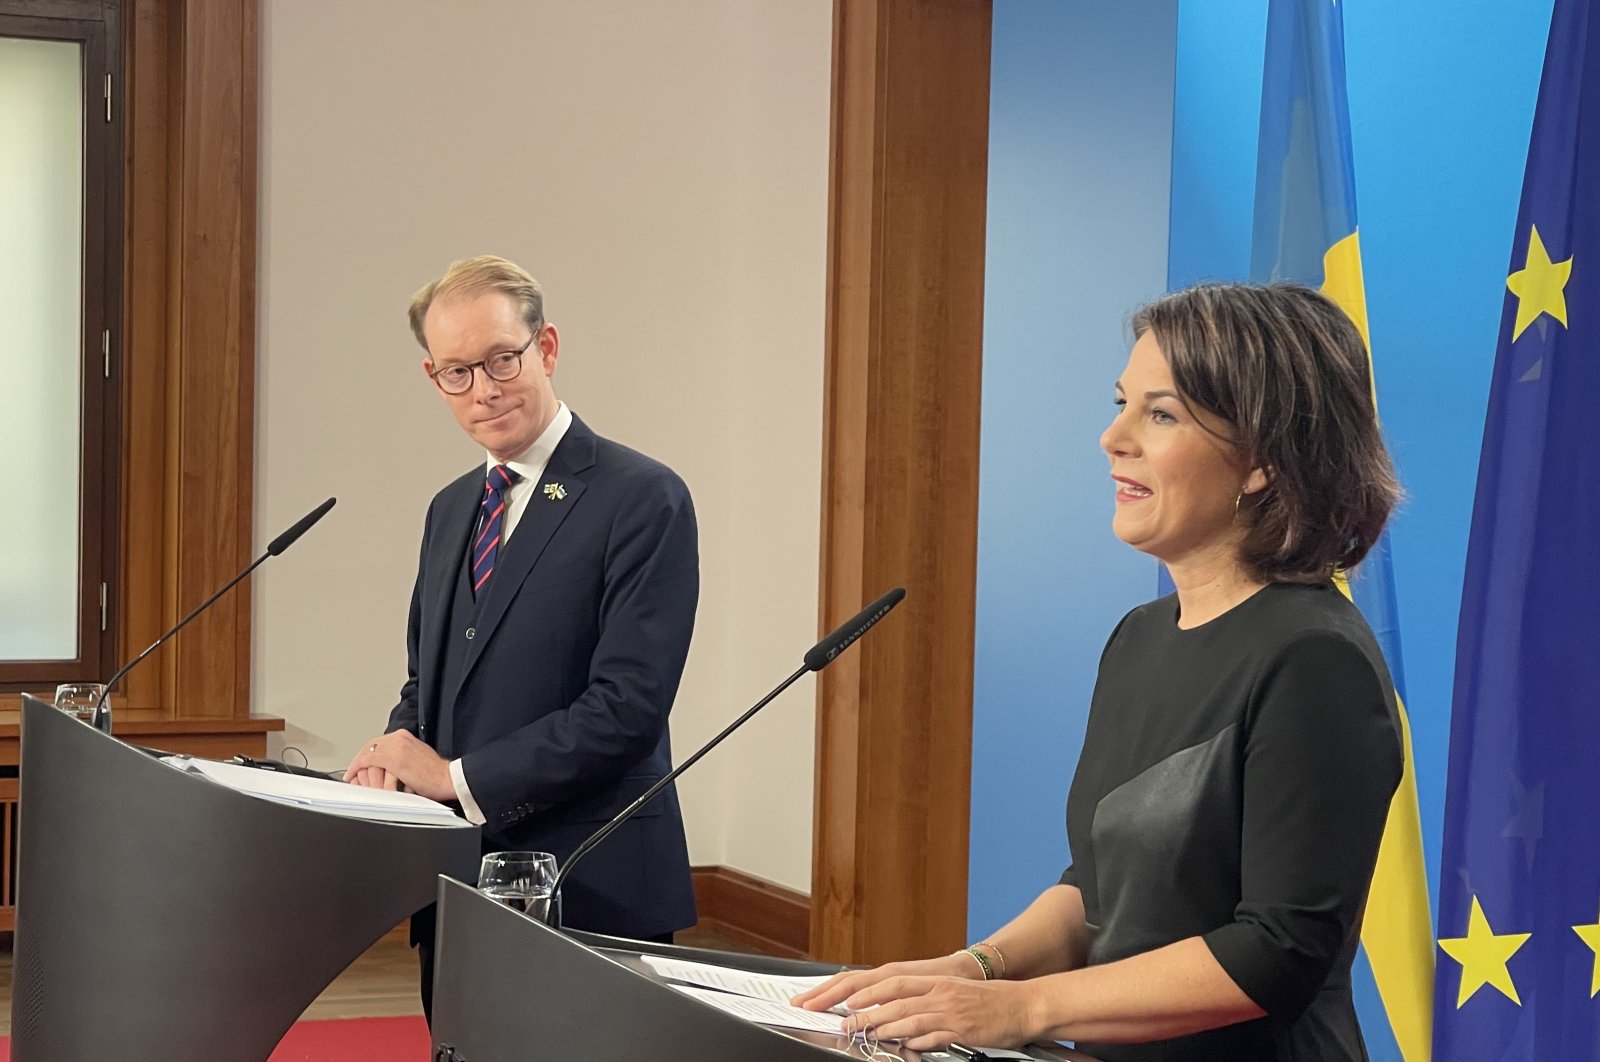 Swedish Foreign Minister Tobias Billstrom (L) during a joint news conference with his German counterpart Annalena Baerbock in Berlin, Germany, Nov. 10, 2022. (AA Photo)